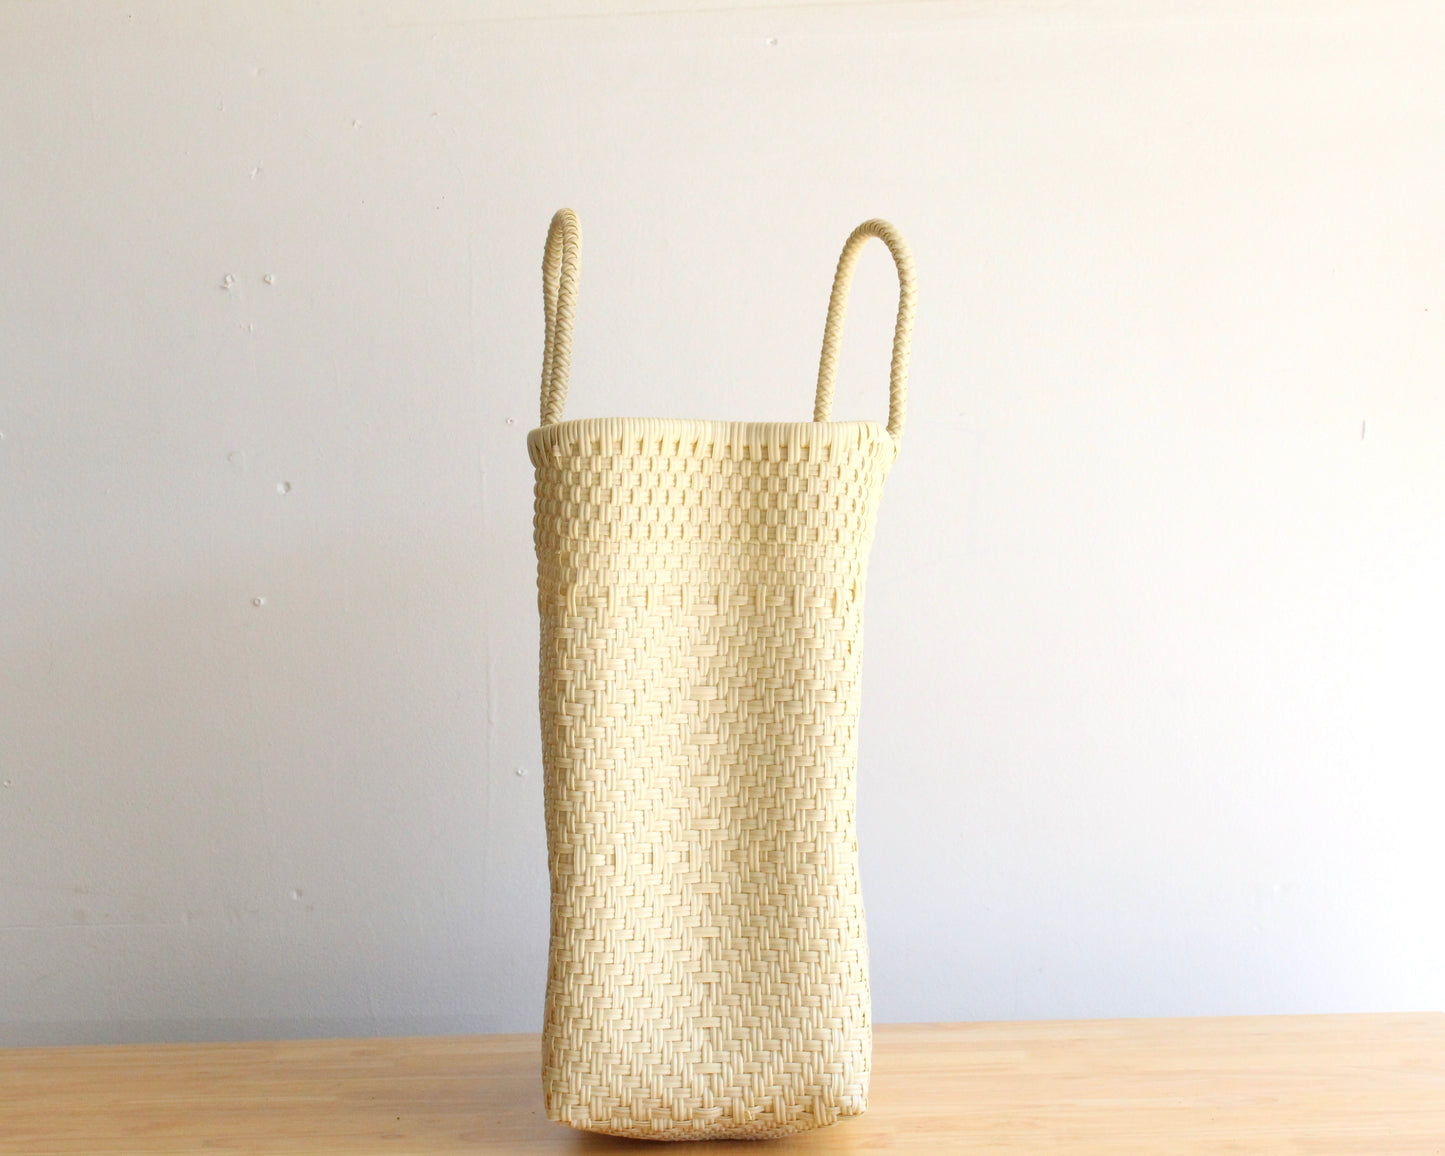 Beige Tote Bag by MexiMexi